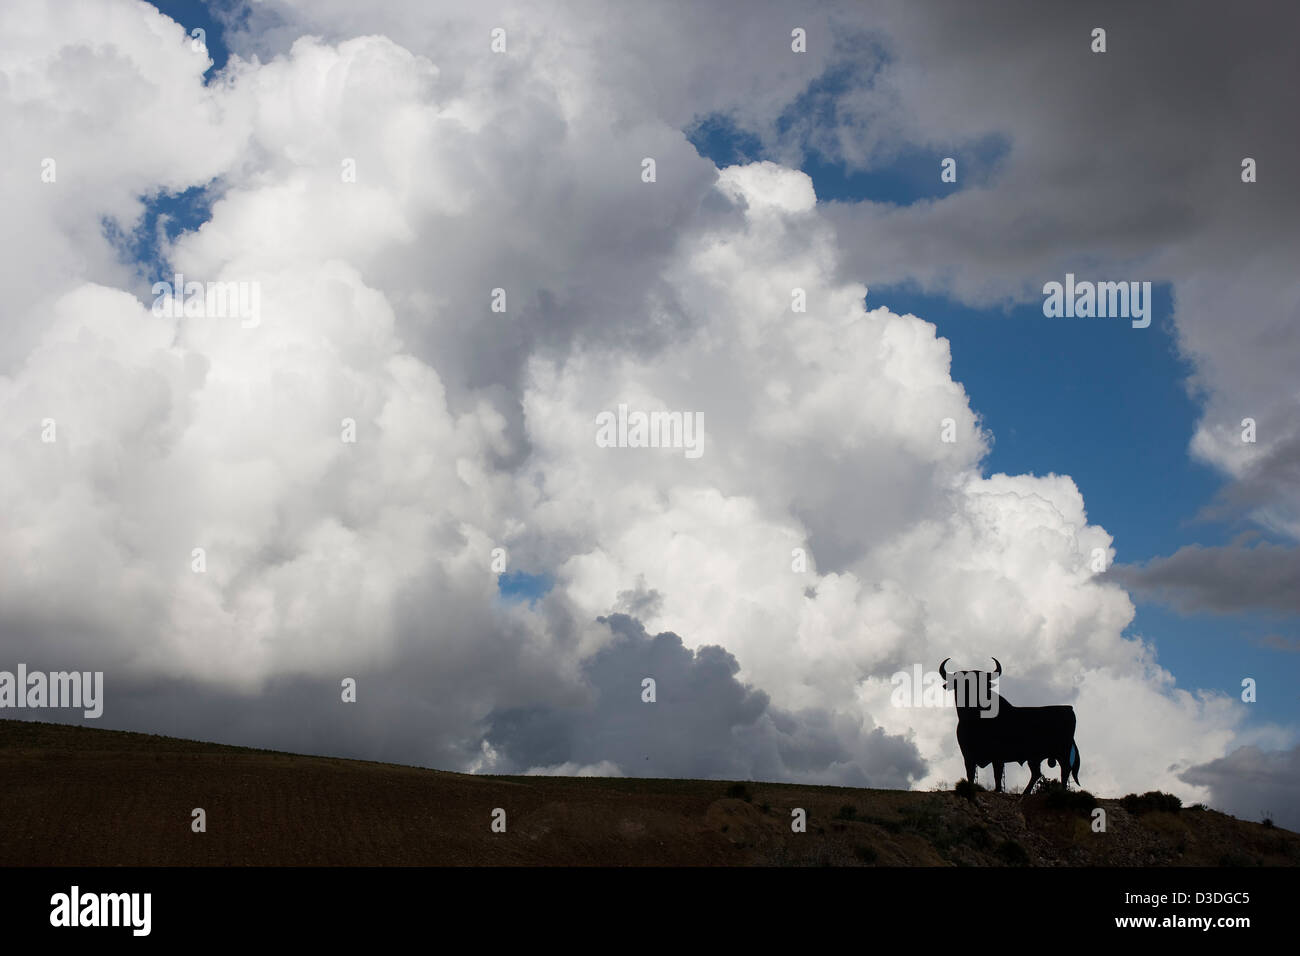 JEREZ-SEVILLE MOTORWAY, SPAIN, 19TH FEBRUARY 2008: A huge silhouetted image of a bull stands on a hillside overooking the Jerez-Seville motorway.  The black bull, a trademark of sherry producer Osborne, was part of a national advertising campaign.   When Spain outlawed billboards on national roads in the 1990's these black bulls had become a national symbol and were retained (without words) by popular demand. Stock Photo